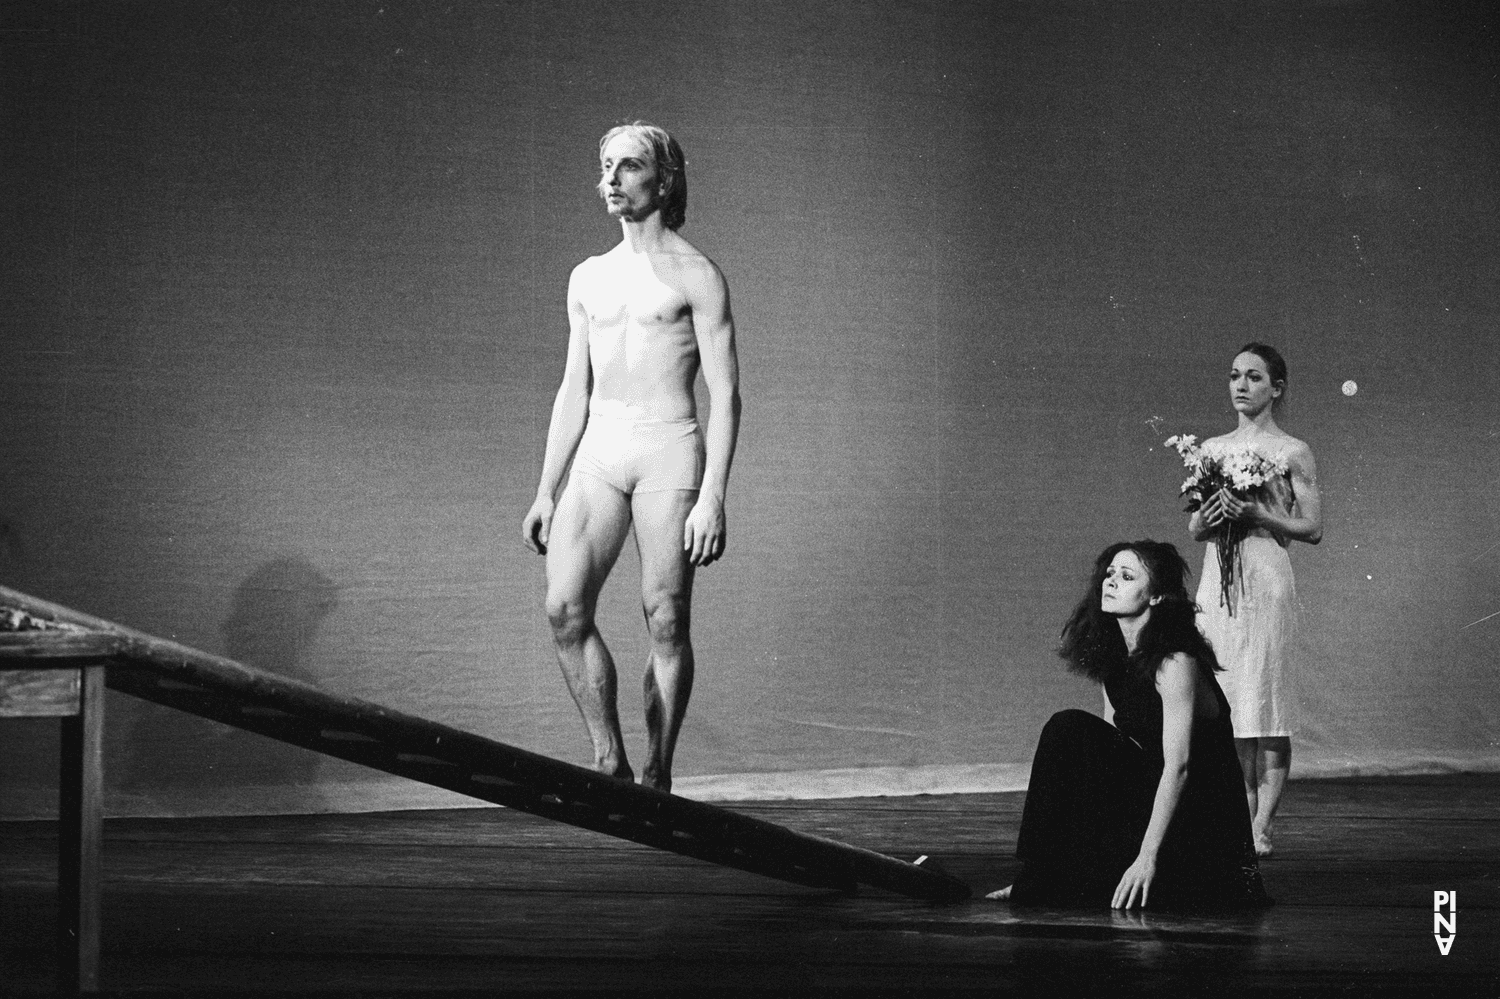 Dominique Mercy, Malou Airaudo and Vivienne Newport in “Iphigenie auf Tauris” by Pina Bausch at Opernhaus Wuppertal, season 1973/74